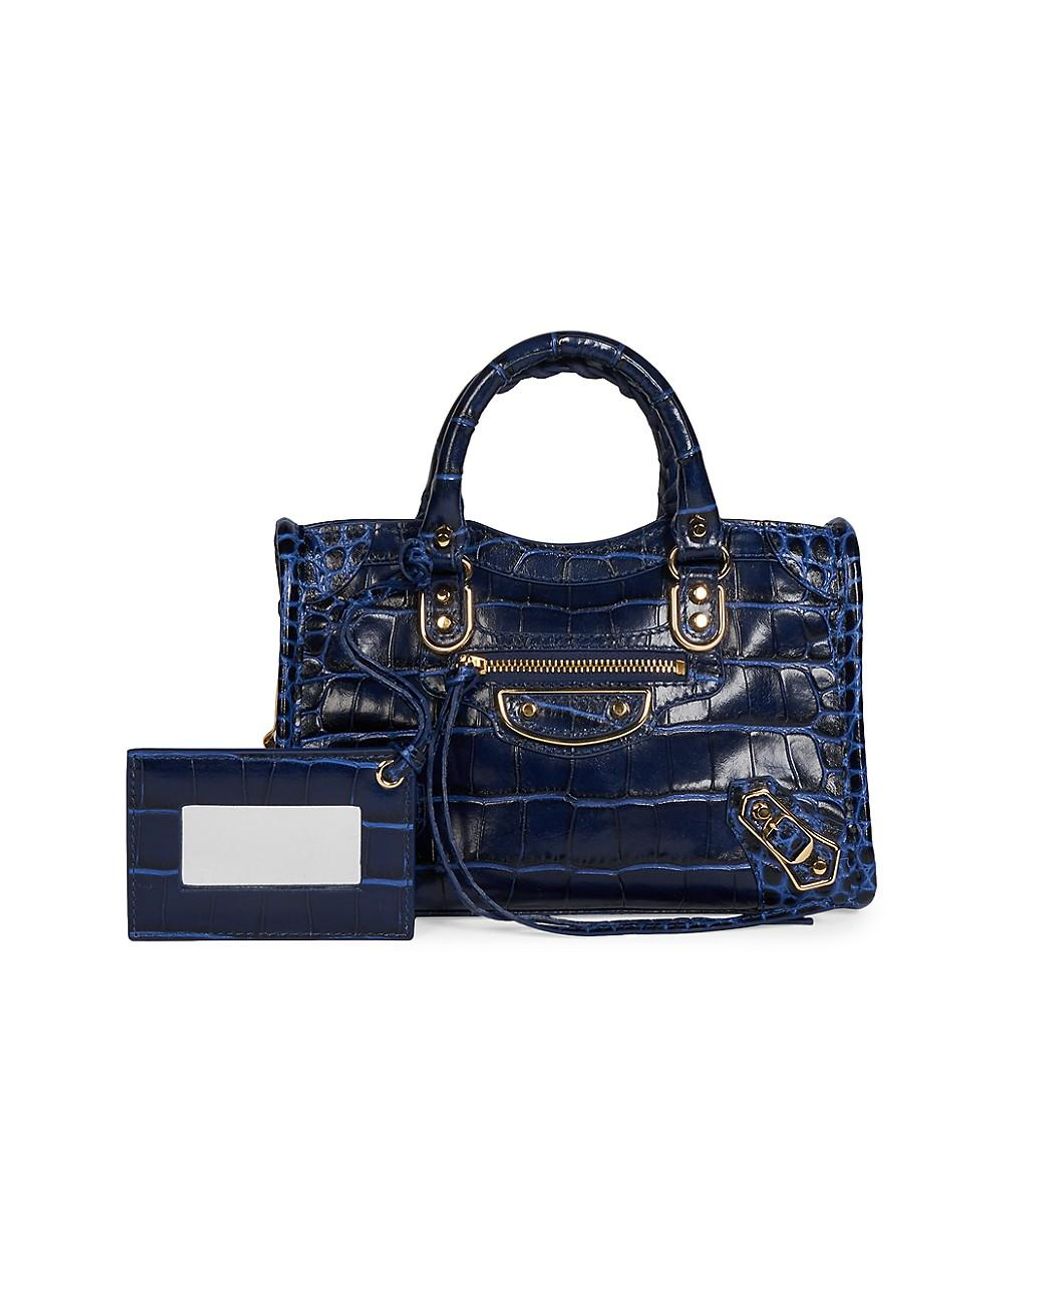 Balenciaga Small City Croc-embossed Leather Satchel in Navy 